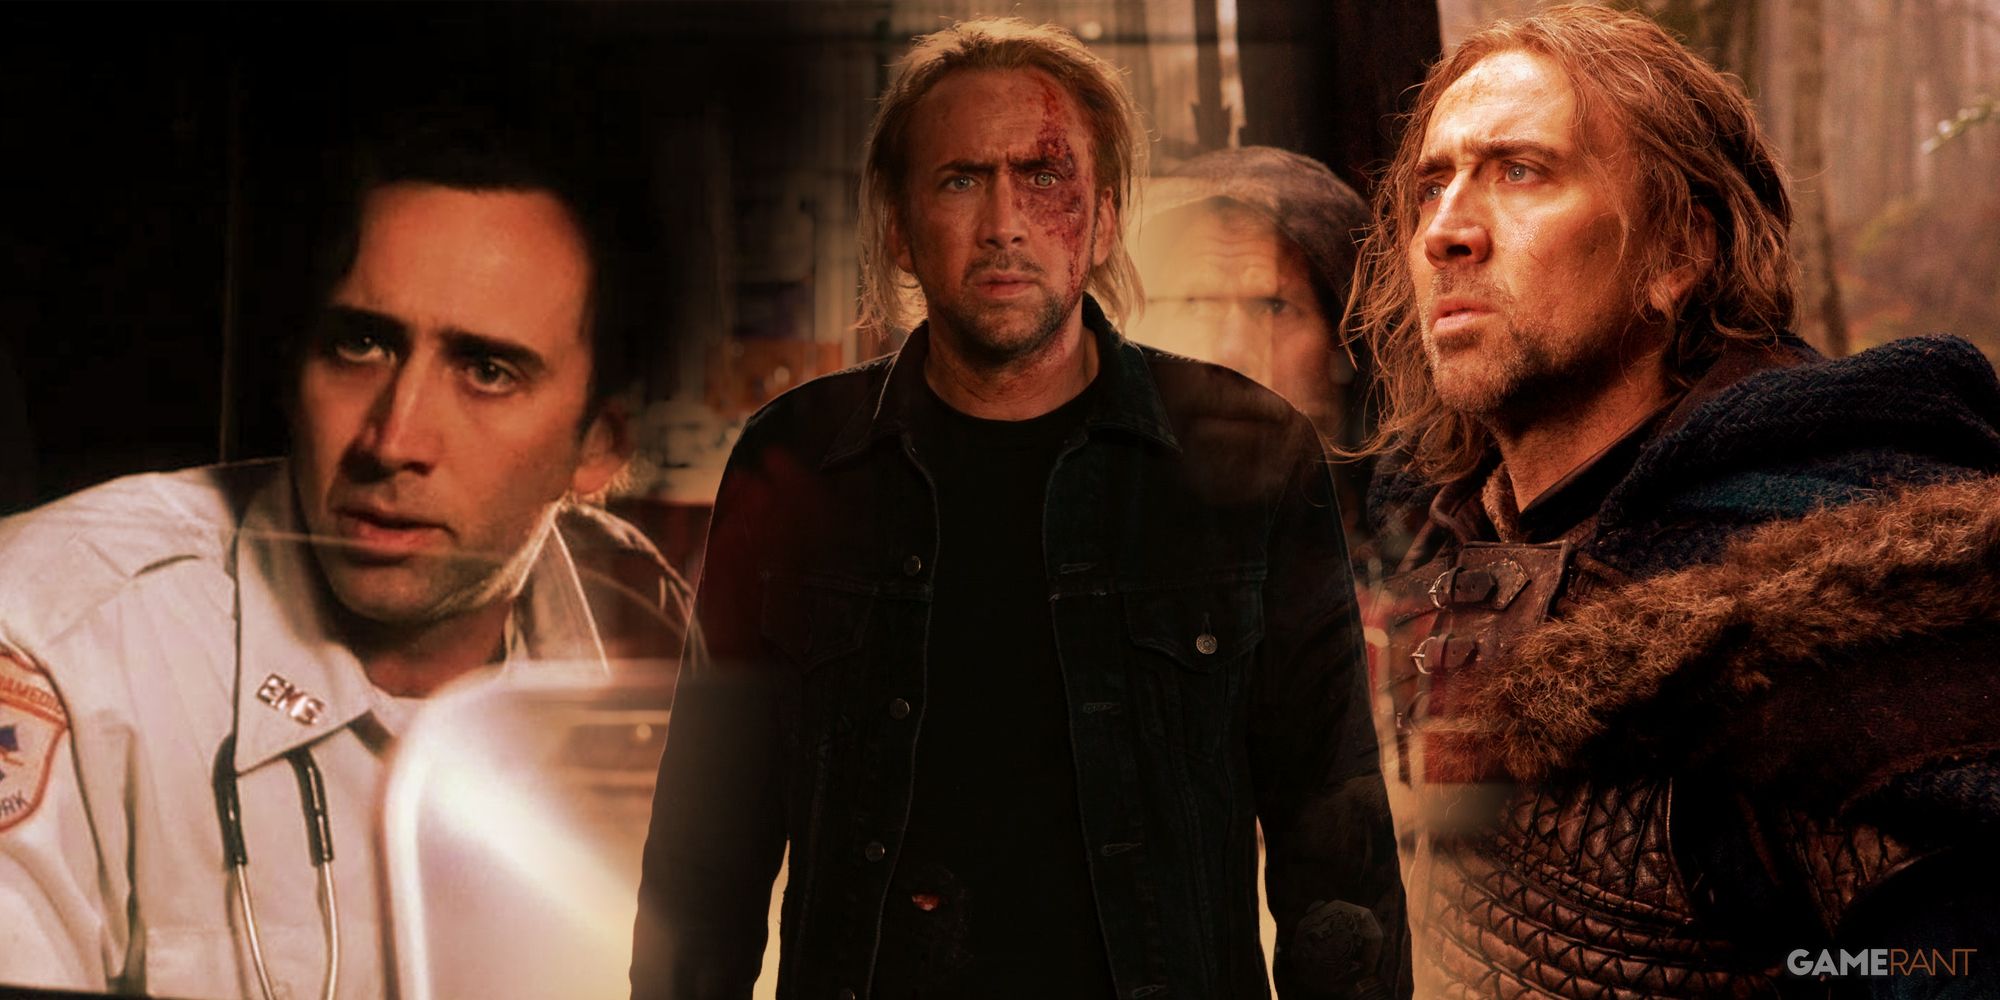 Nicolas Cage movies Bringing Out The Dead, Drive Angry, Season Of The Witch